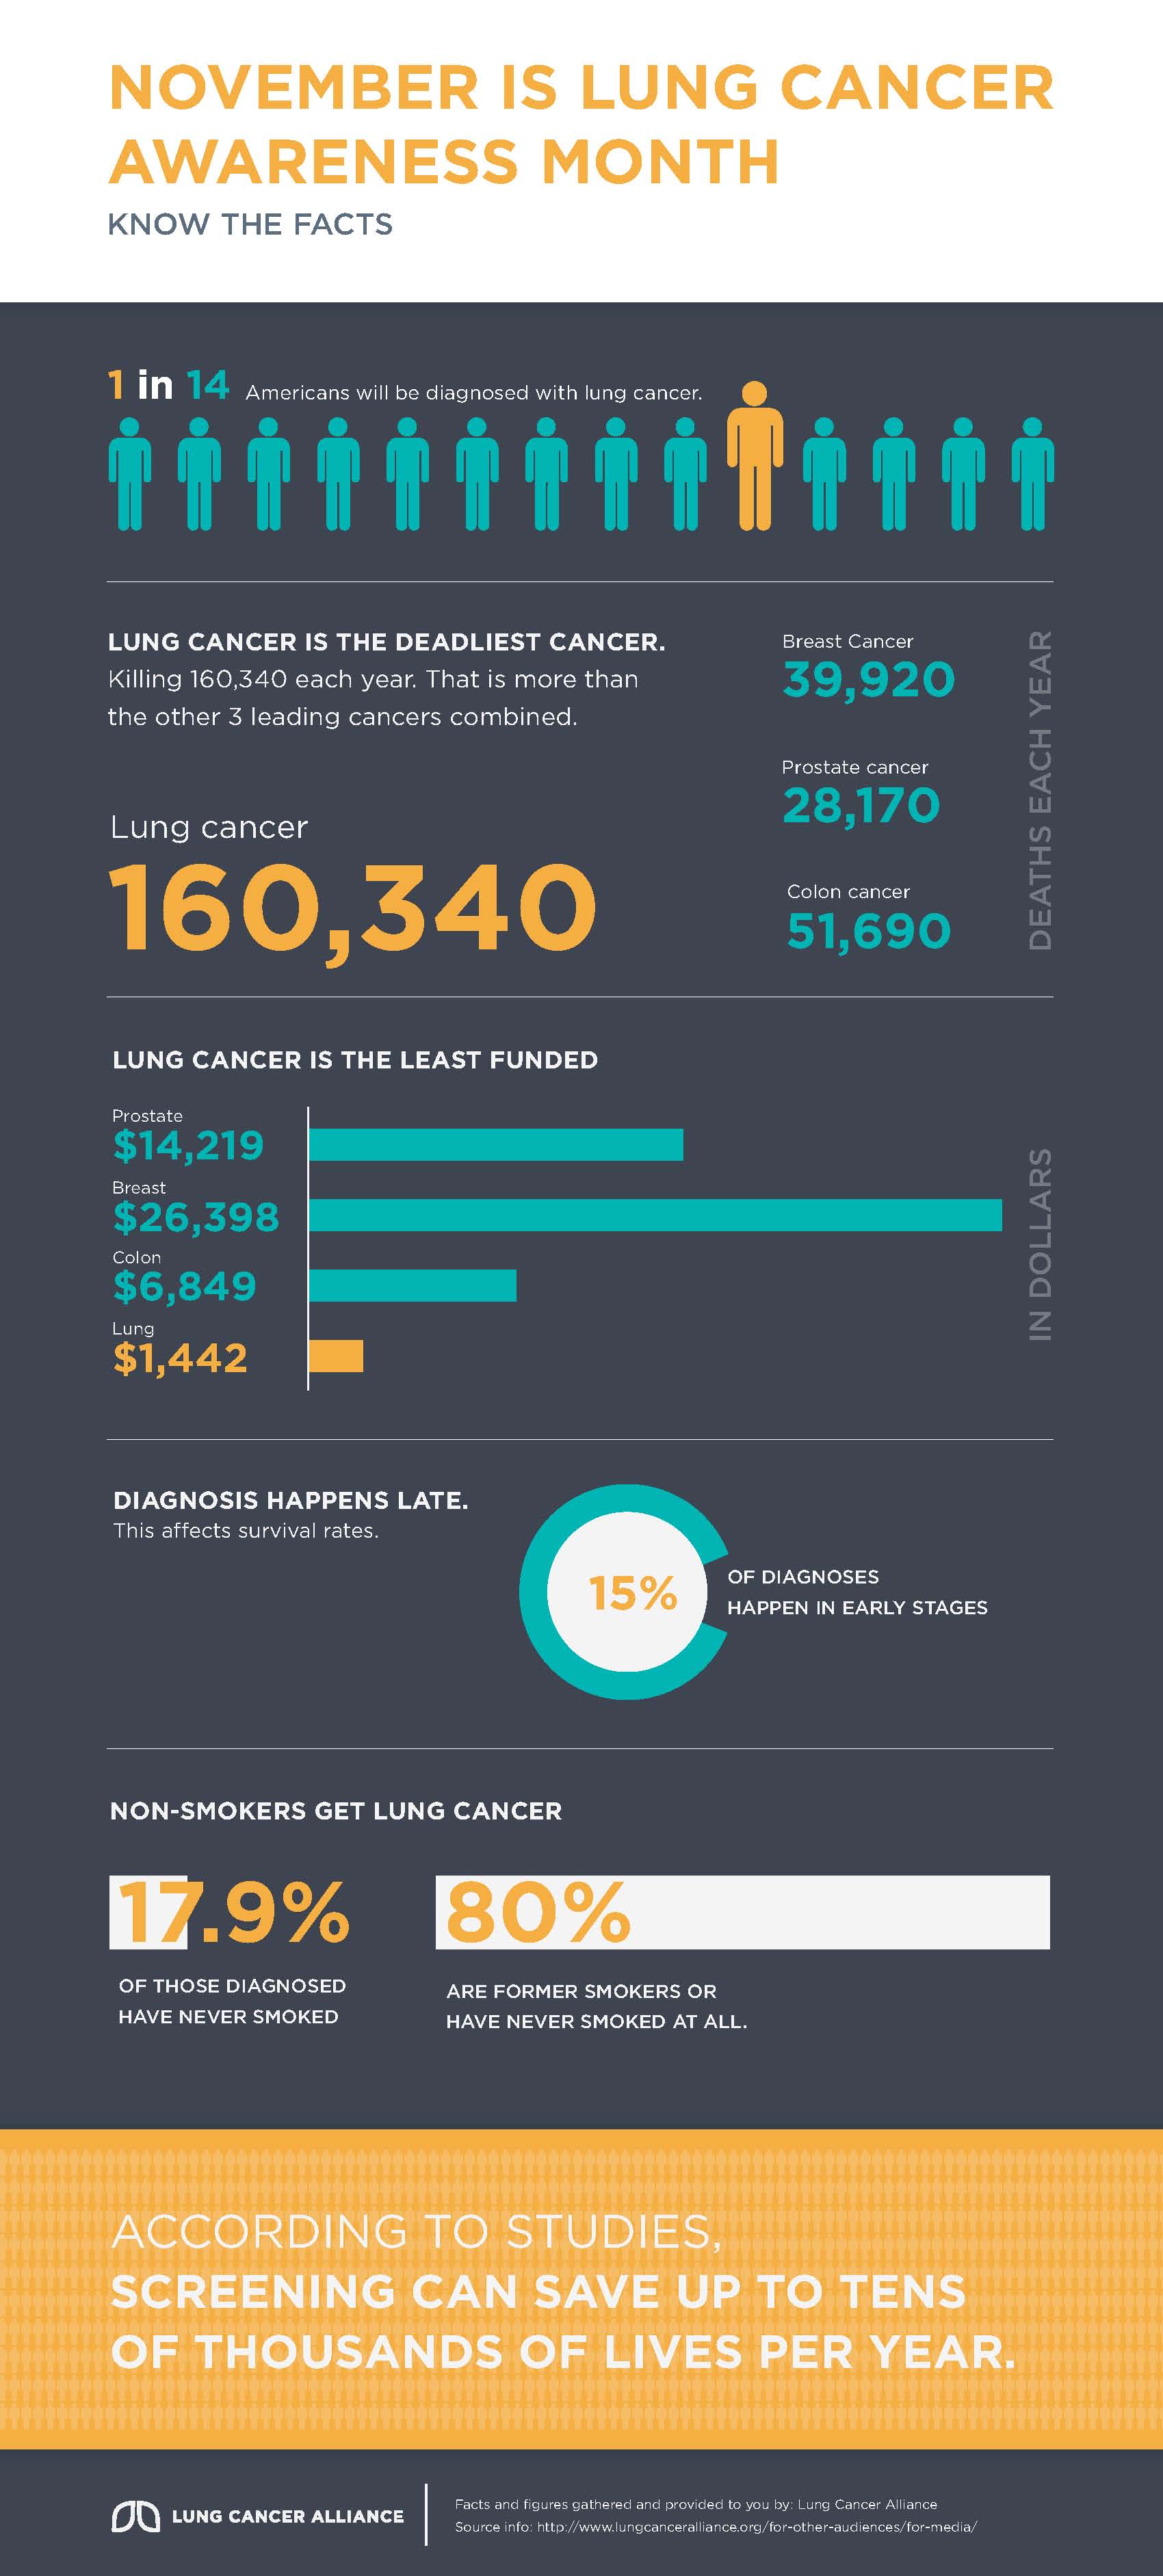 Lung Cancer: Know the Facts